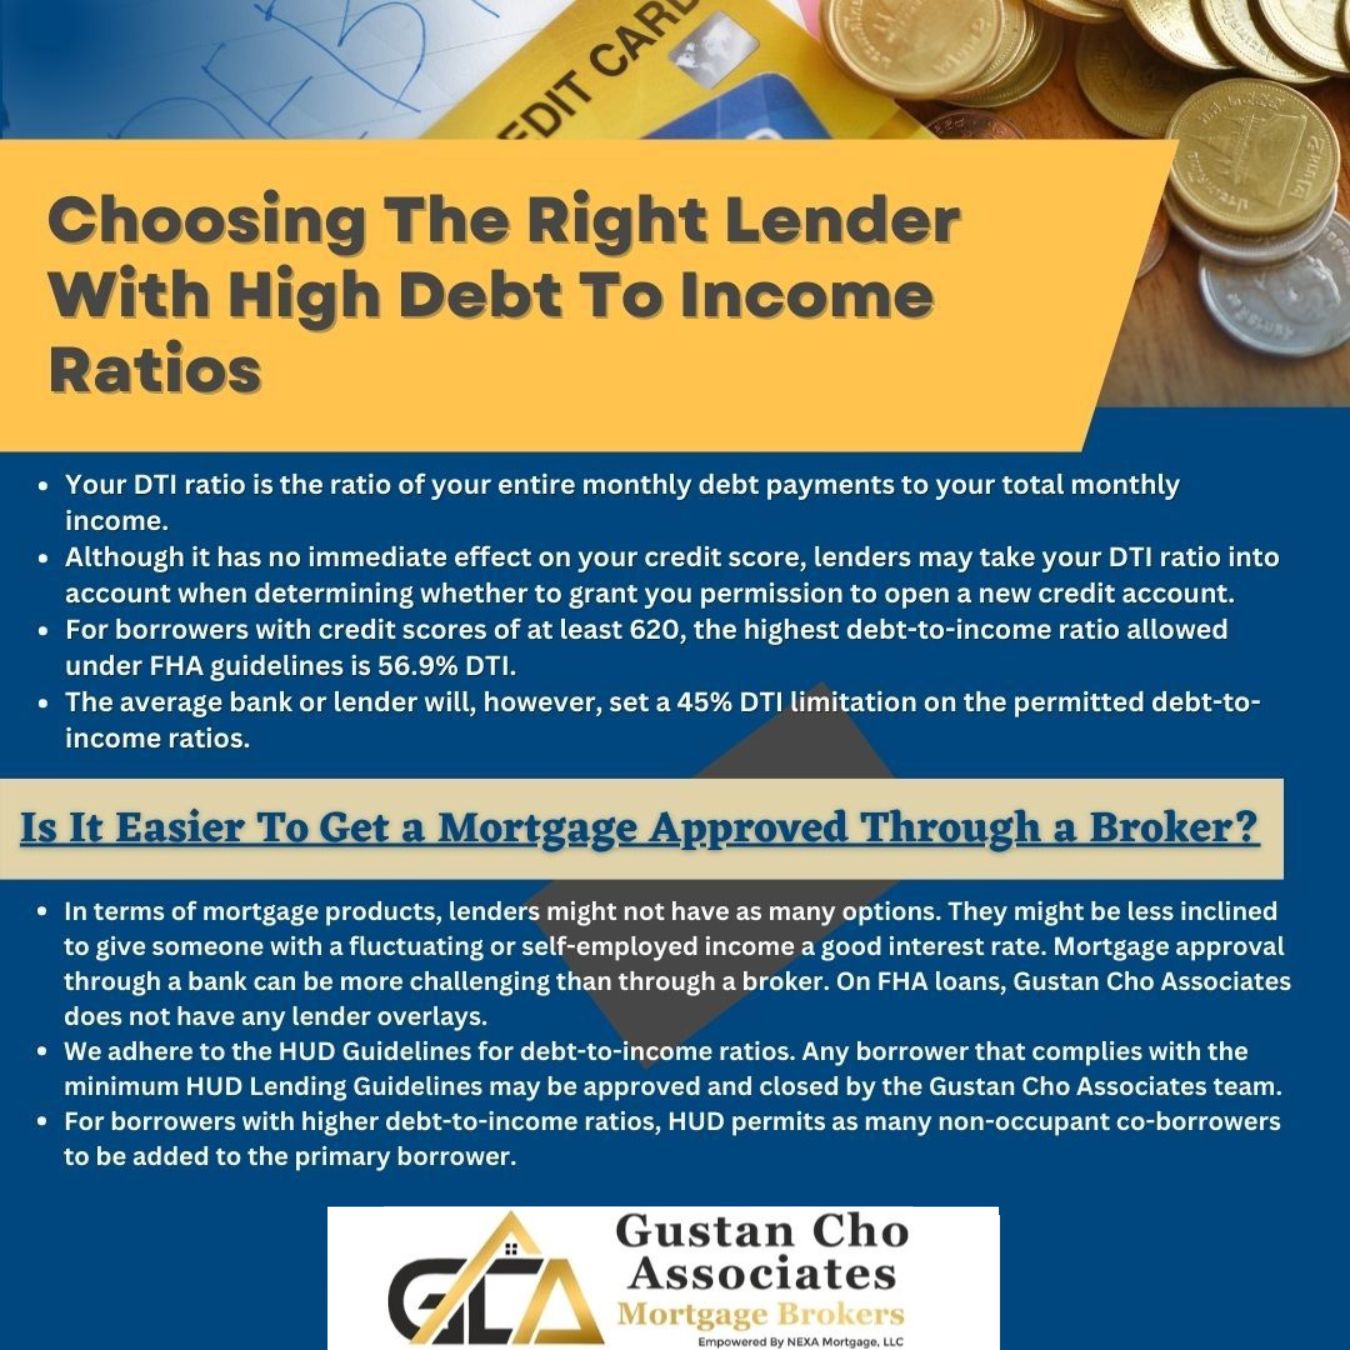 Choosing The Right Lender With High Debt To Income Ratios